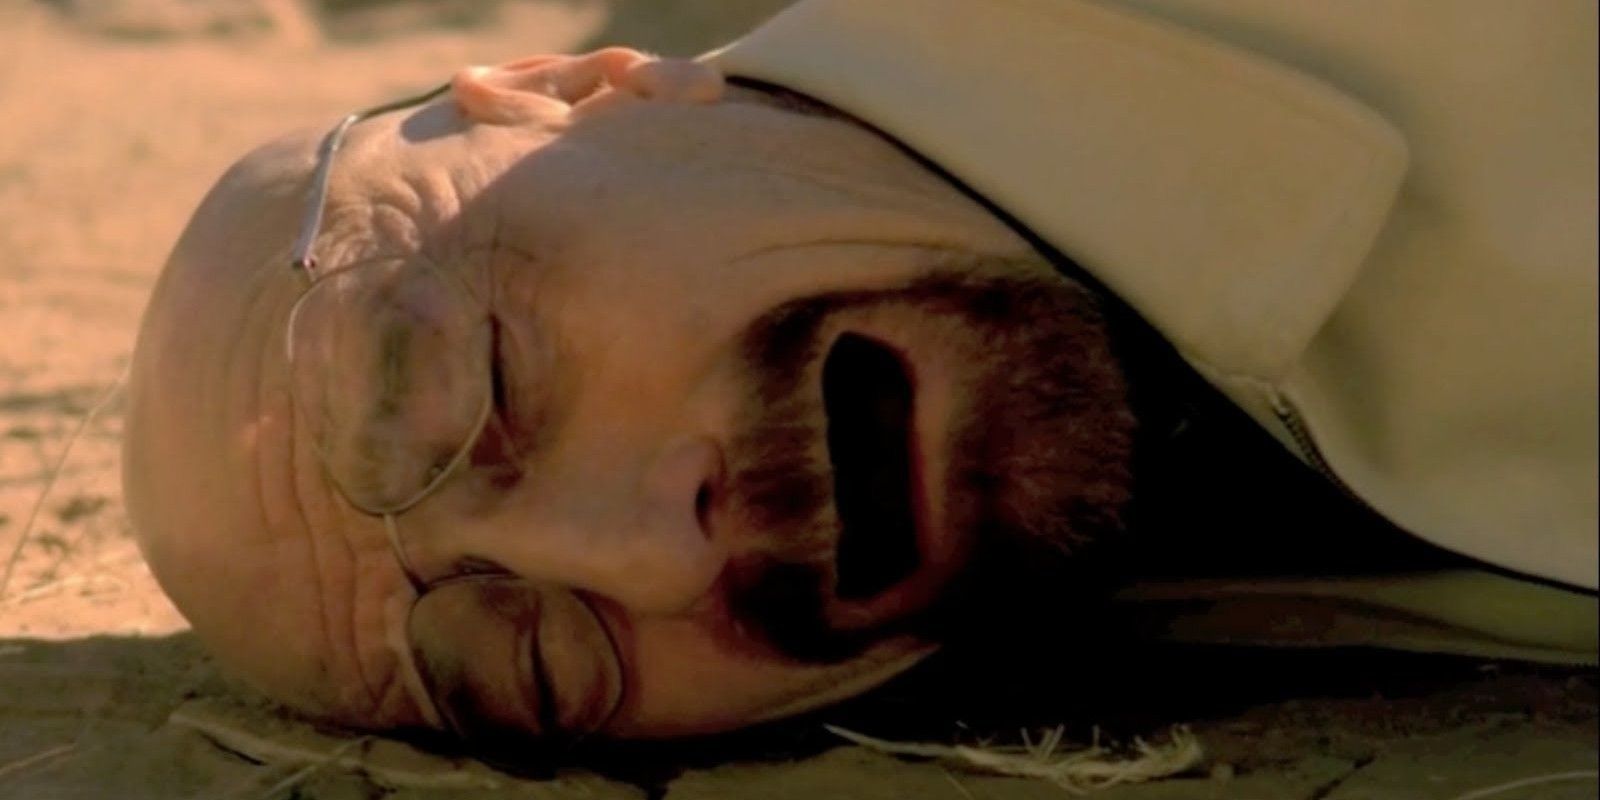 Walt close-up after Hank's death in Breaking Bad